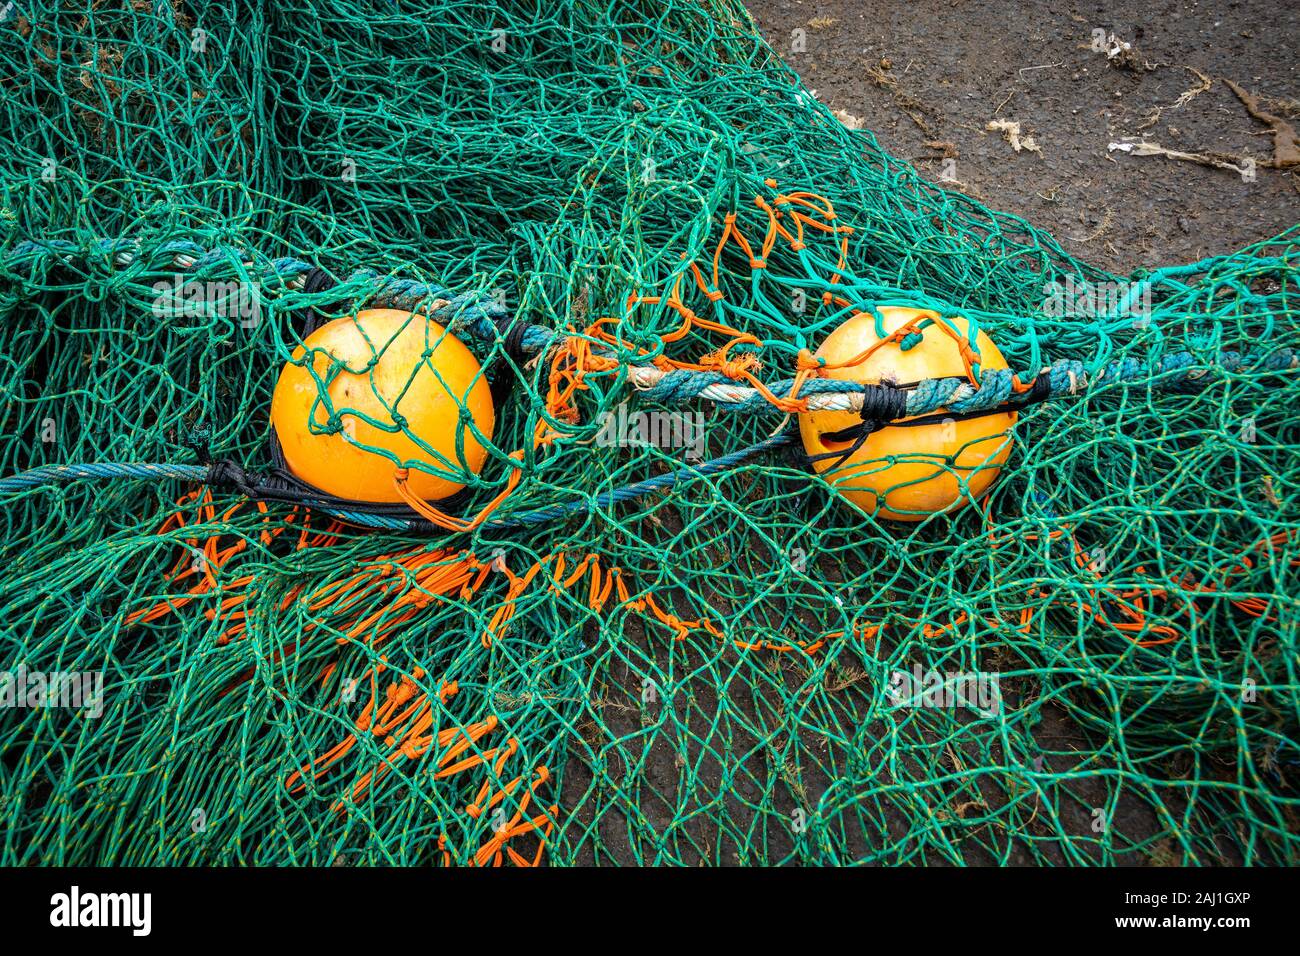 Fishing net on the ground with two yellow buoys Stock Photo